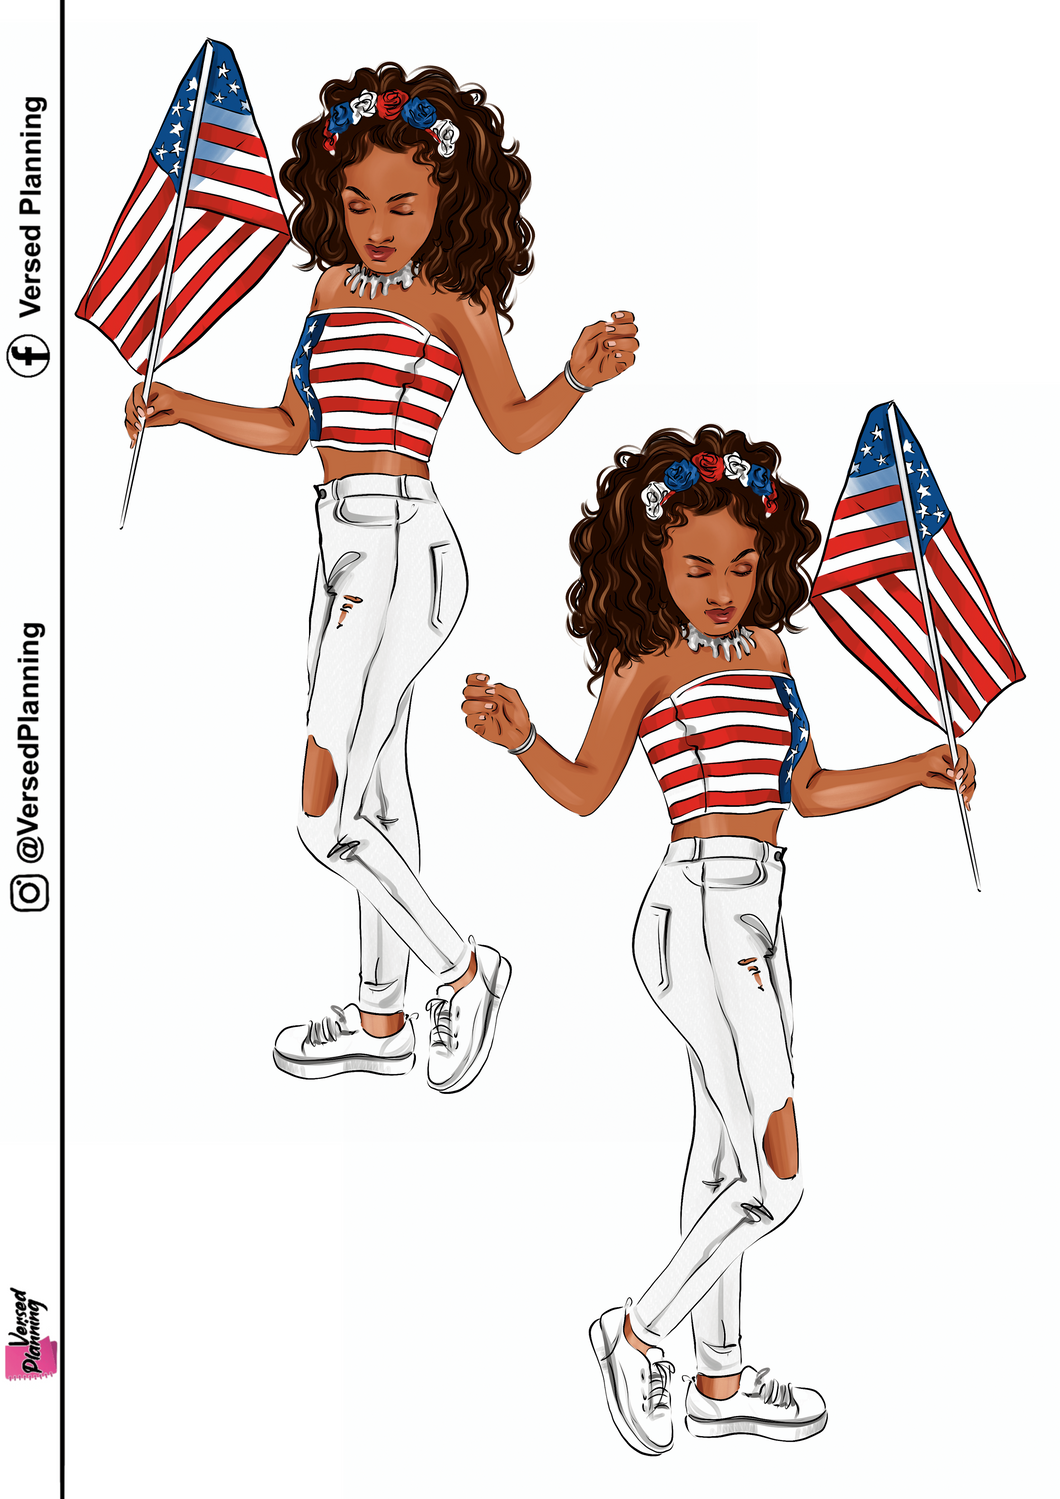 FLAG ON THE PLAY, JULY 4TH DOLL